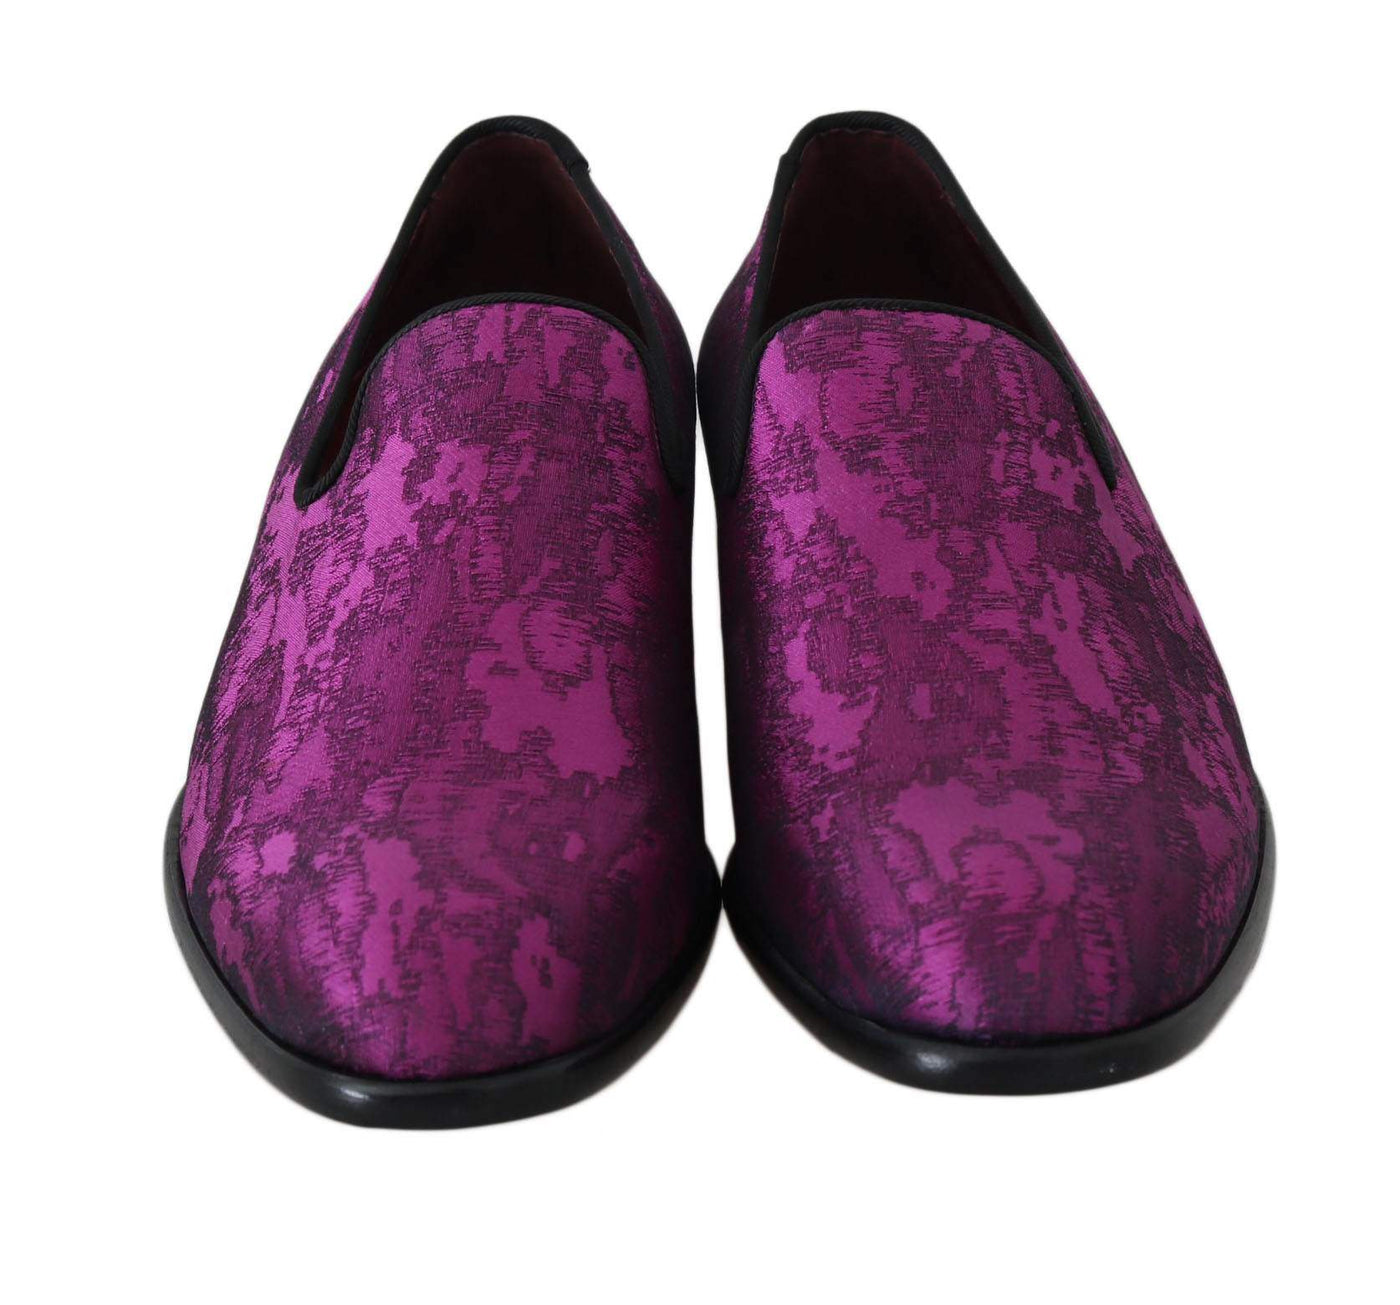 Dolce & Gabbana  Purple Jacquard Loafers Dress Formal Shoes #men, Brand_Dolce & Gabbana, Catch, Category_Shoes, Dolce & Gabbana, EU39/US6, feed-agegroup-adult, feed-color-purple, feed-gender-male, feed-size-US6, Gender_Men, Kogan, Loafers - Men - Shoes, Purple, Shoes - New Arrivals at SEYMAYKA